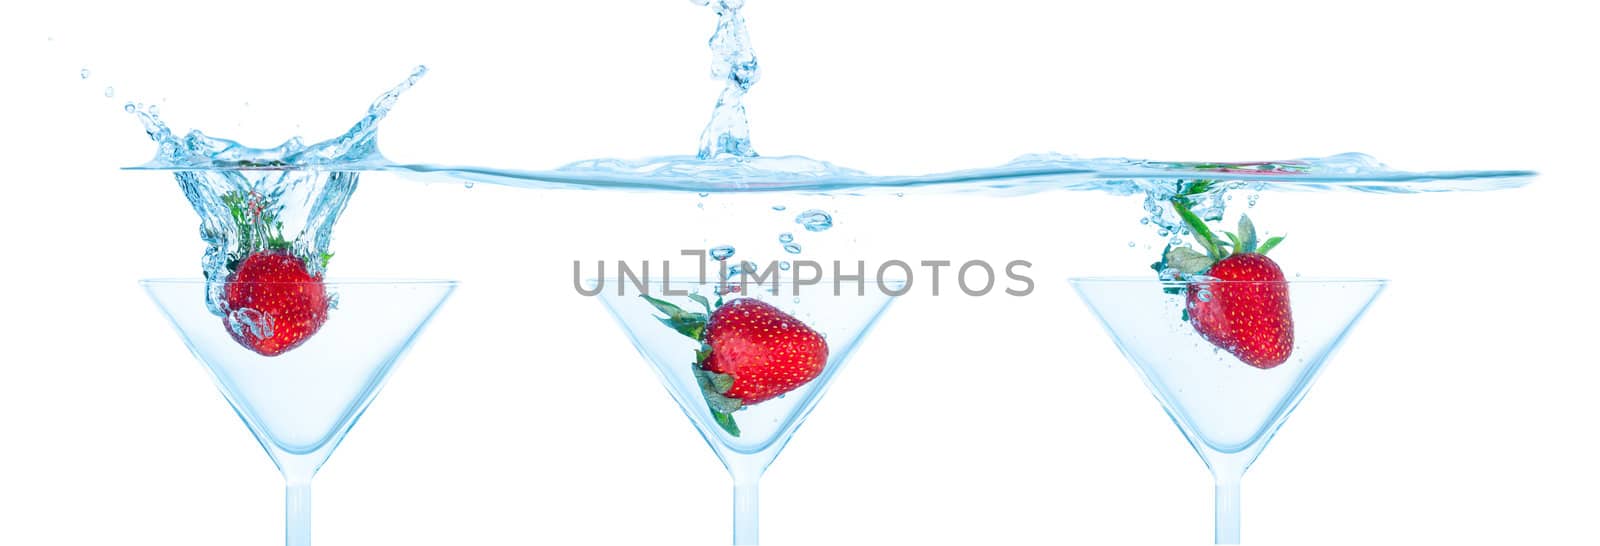 Collage Fresh Strawberry Dropped into Glass with Splash by Discovod